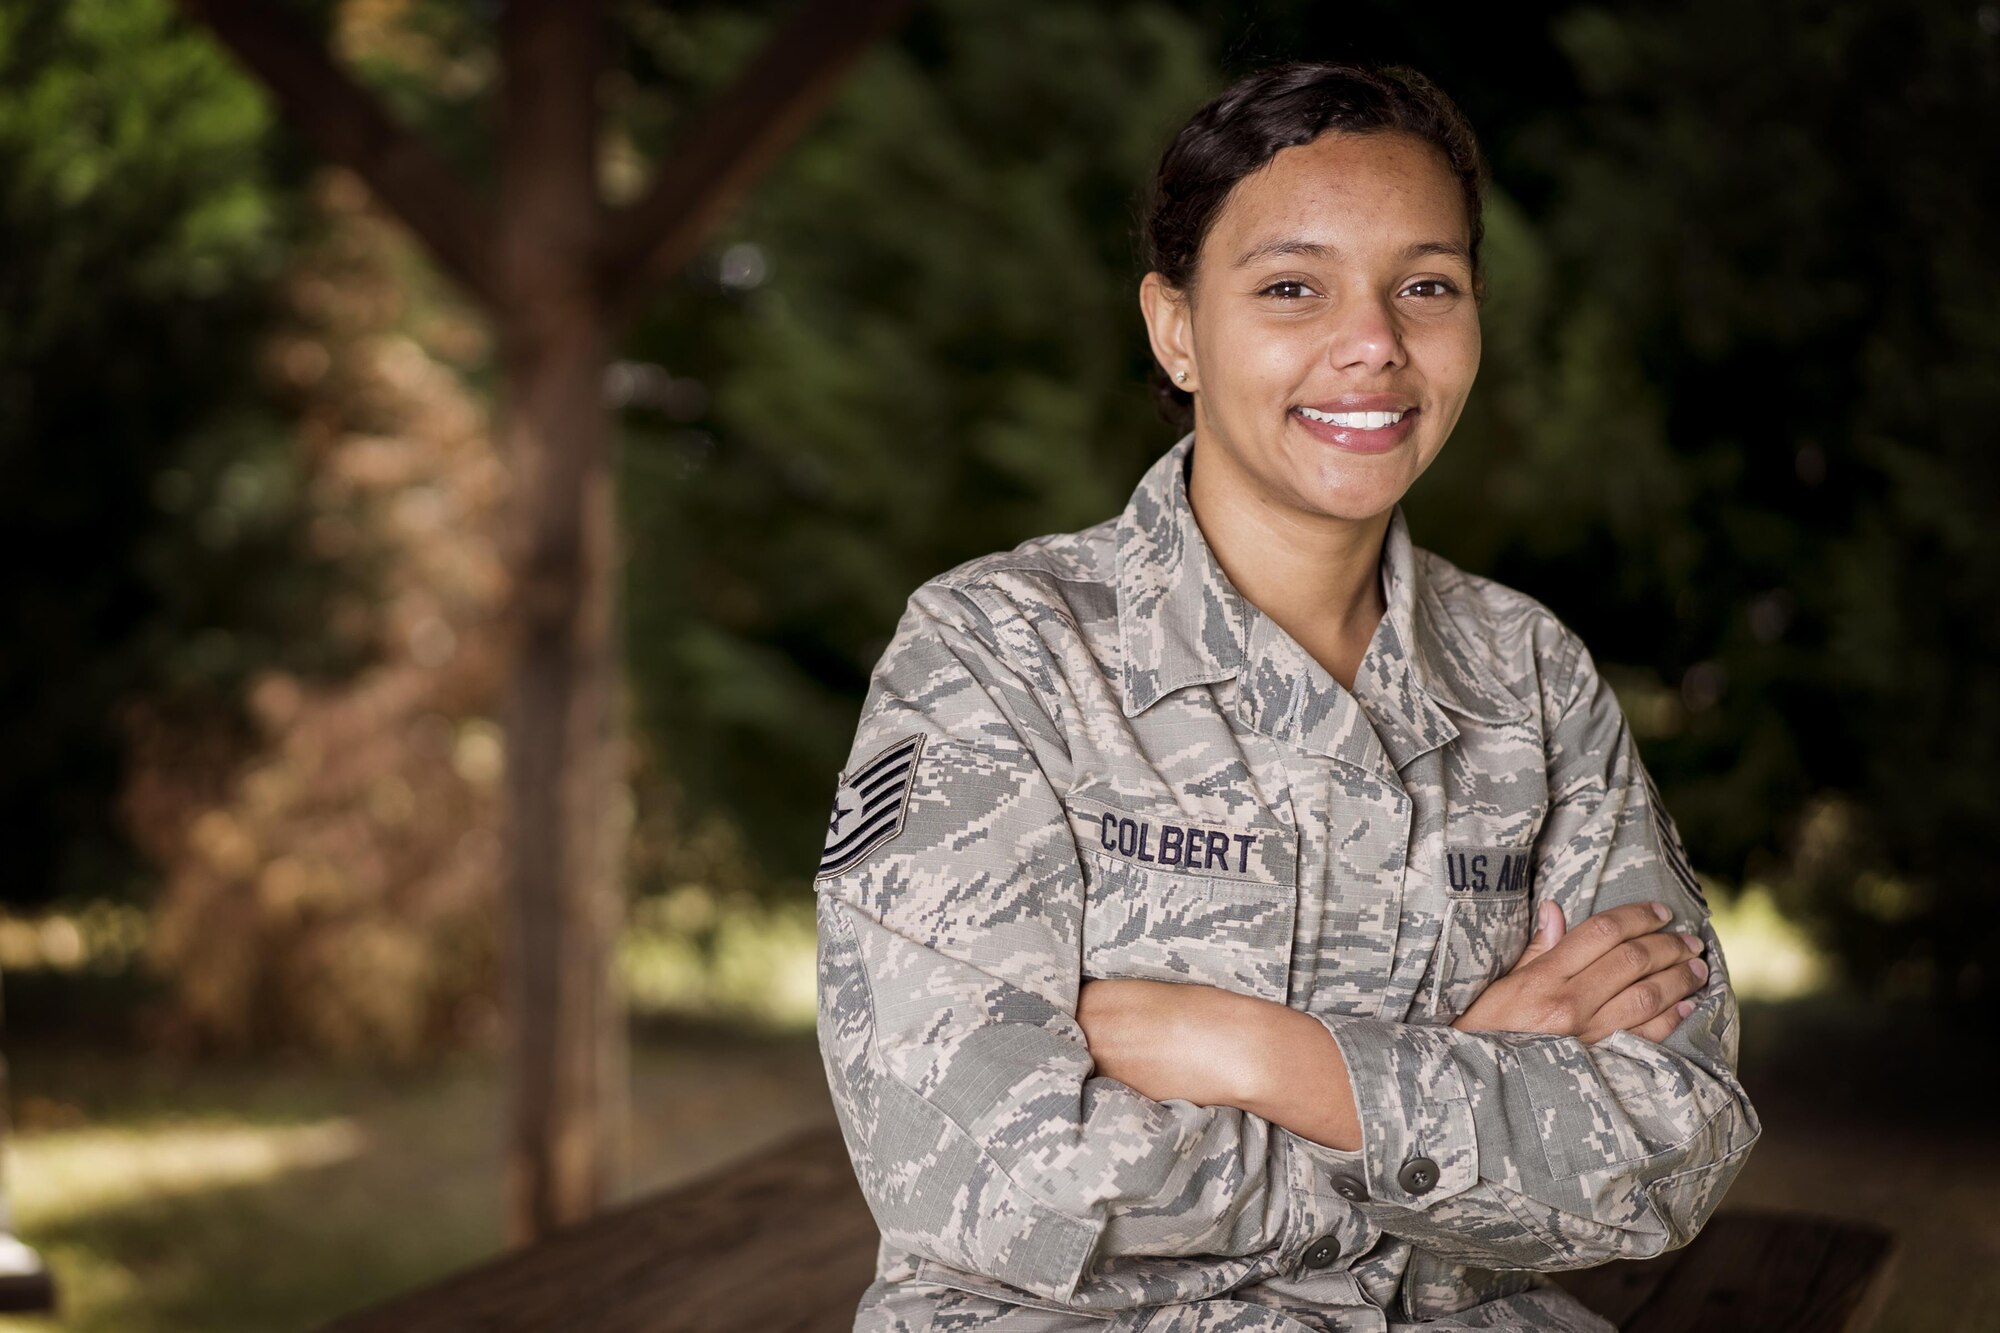 Tech. Sgt. Amanda Colbert, 413th Force Support Flight NCO in charge of customer support, poses for a portrait April 6, 2017, at Robins Air Force Base, Georgia. Colbert is responsible for ensuring the success of the unit’s newcomers program, updating members’ records, processing casualty claims, and the base’s Unit Training Assembly Participation System, among other items. (U.S. Air Force photo by Jamal D. Sutter)